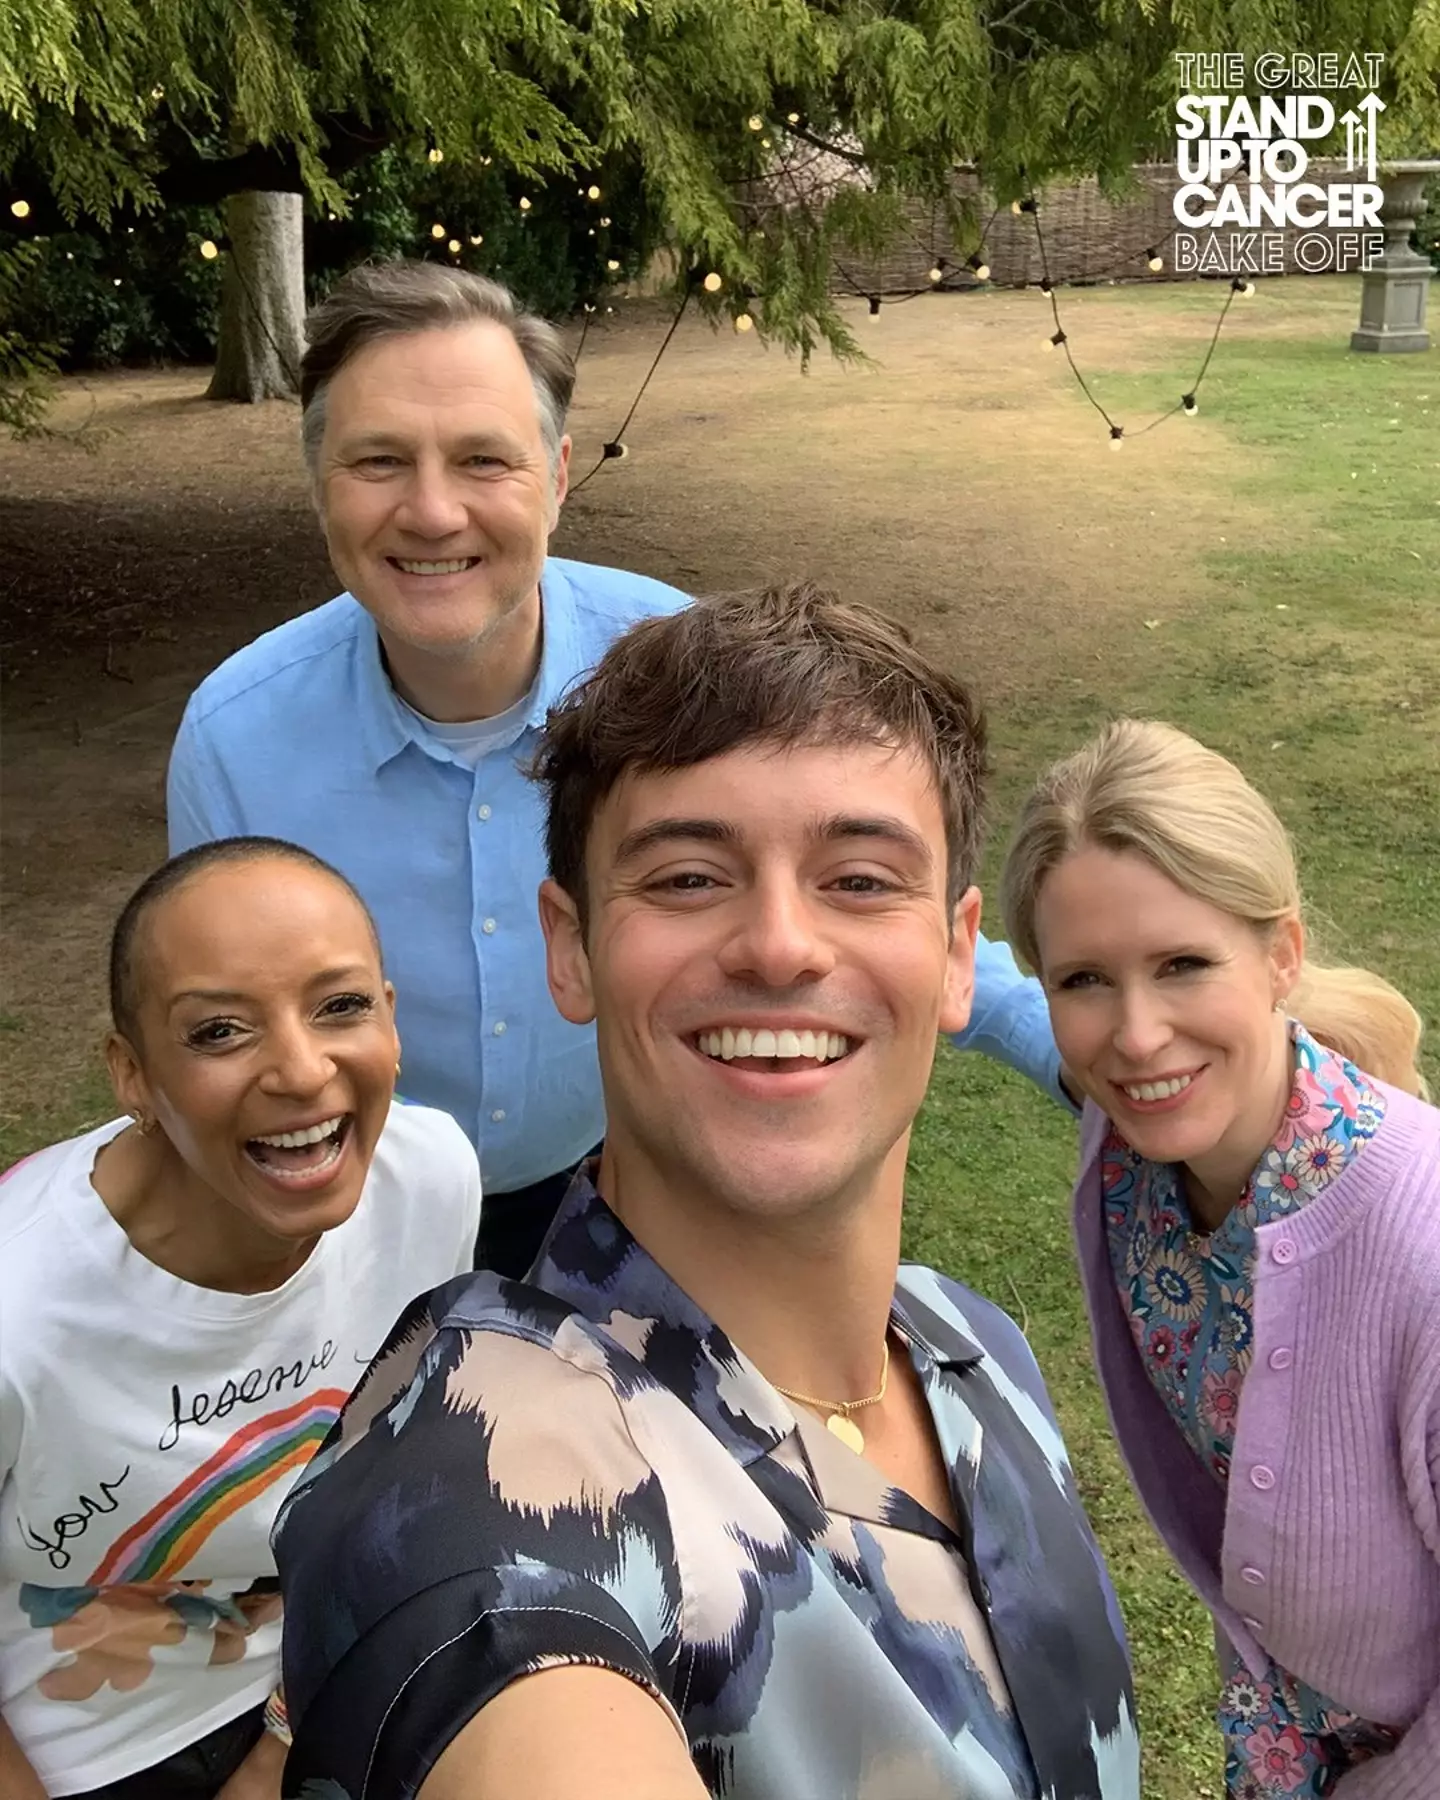 Adele Roberts starred alongside Tom Daley, David Morrissey and Lucy Beaumont in the latest episode of Celebrity Bake Off.